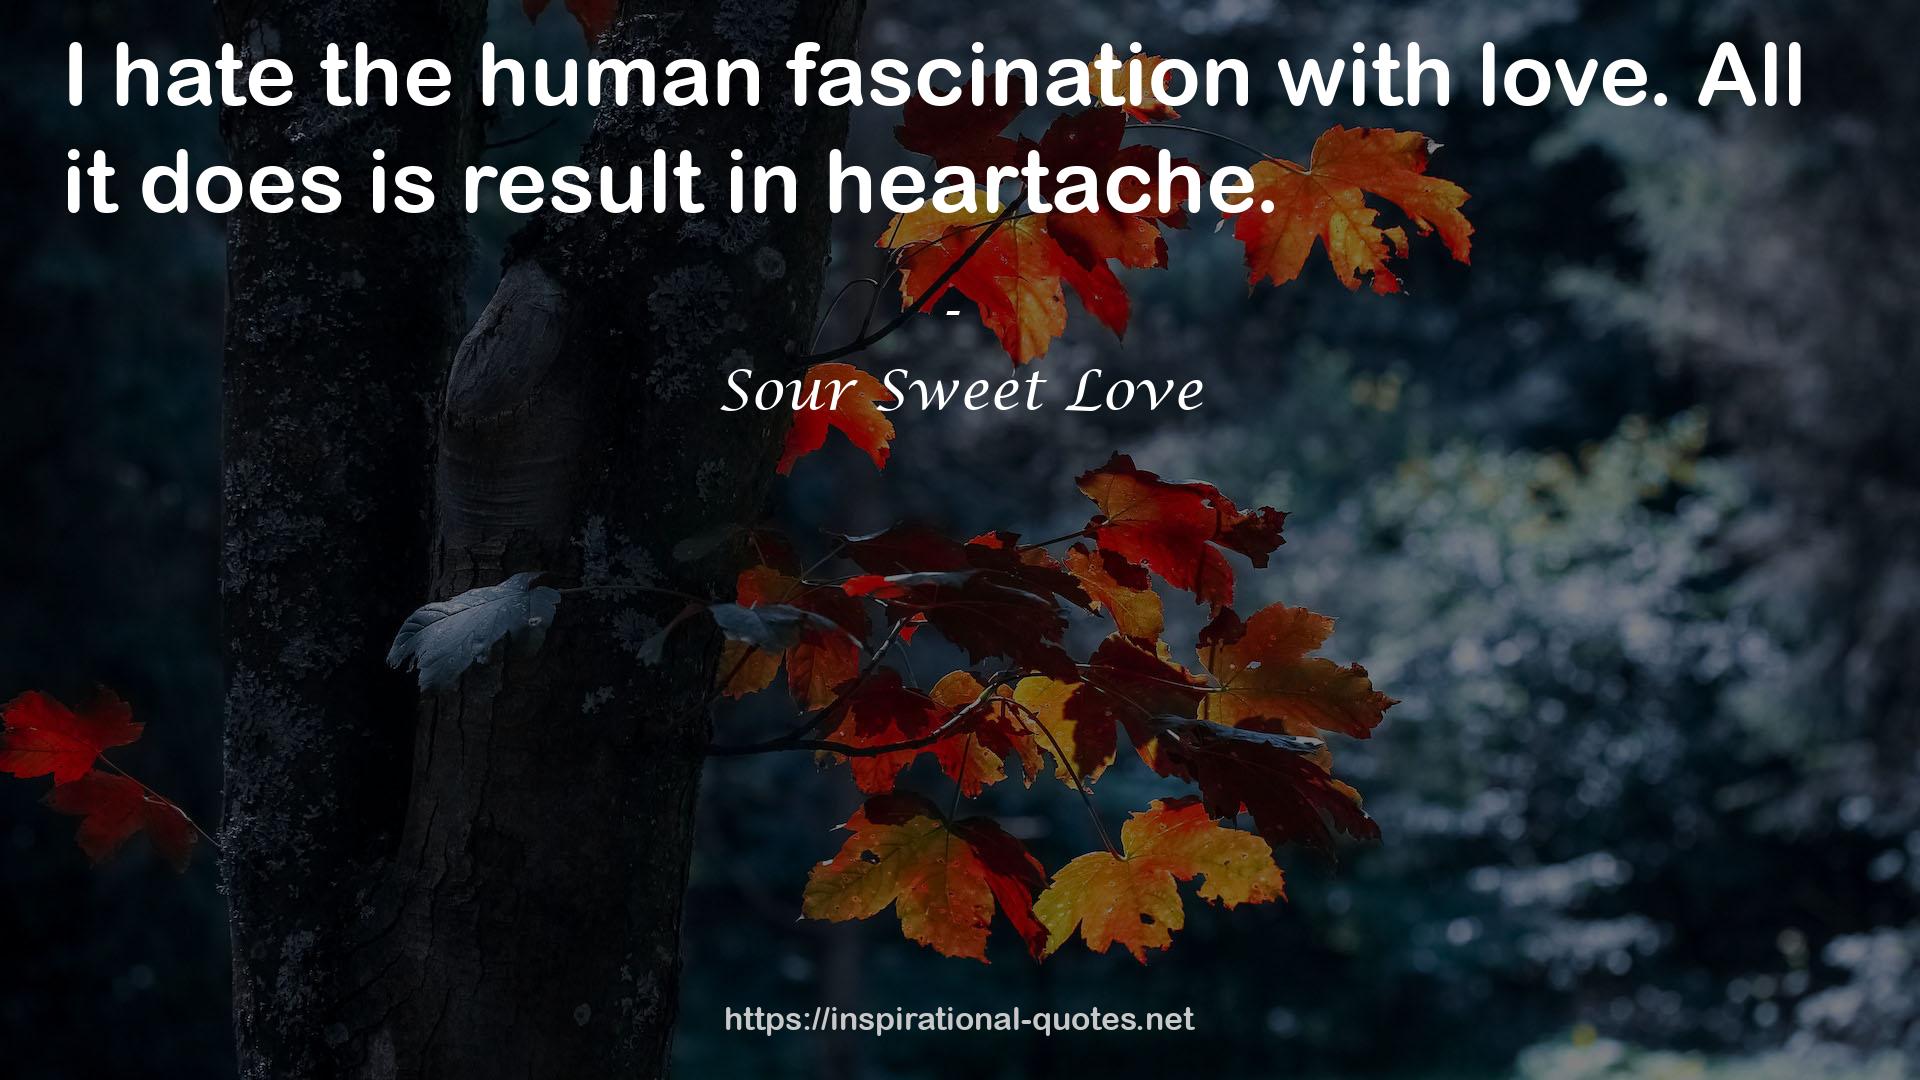 Sour Sweet Love QUOTES